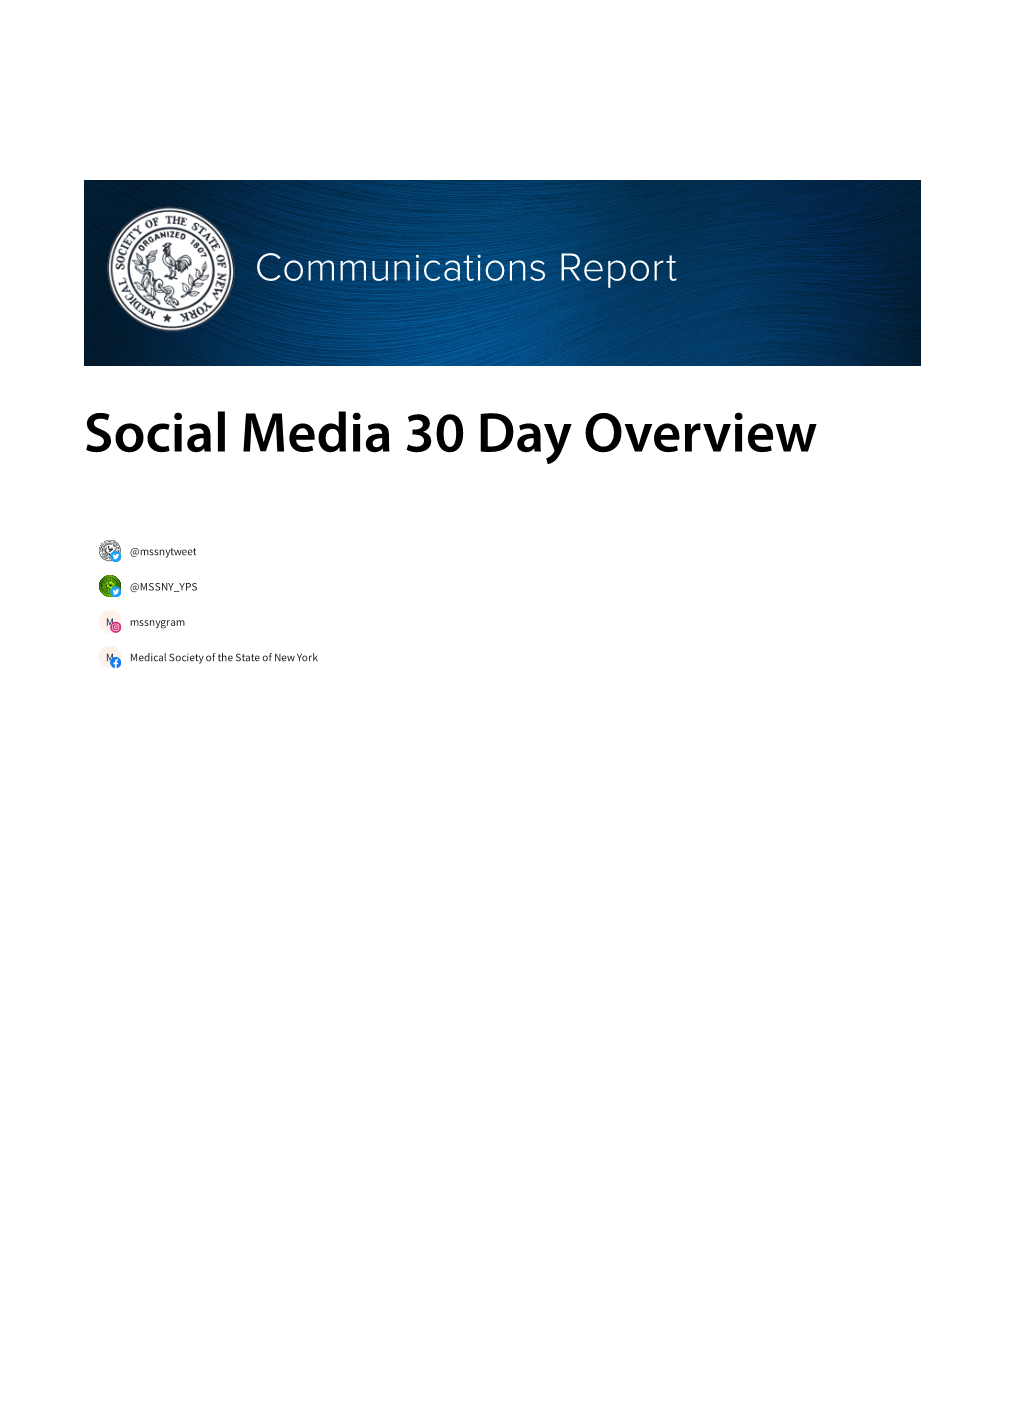 Report from the Division of Communications